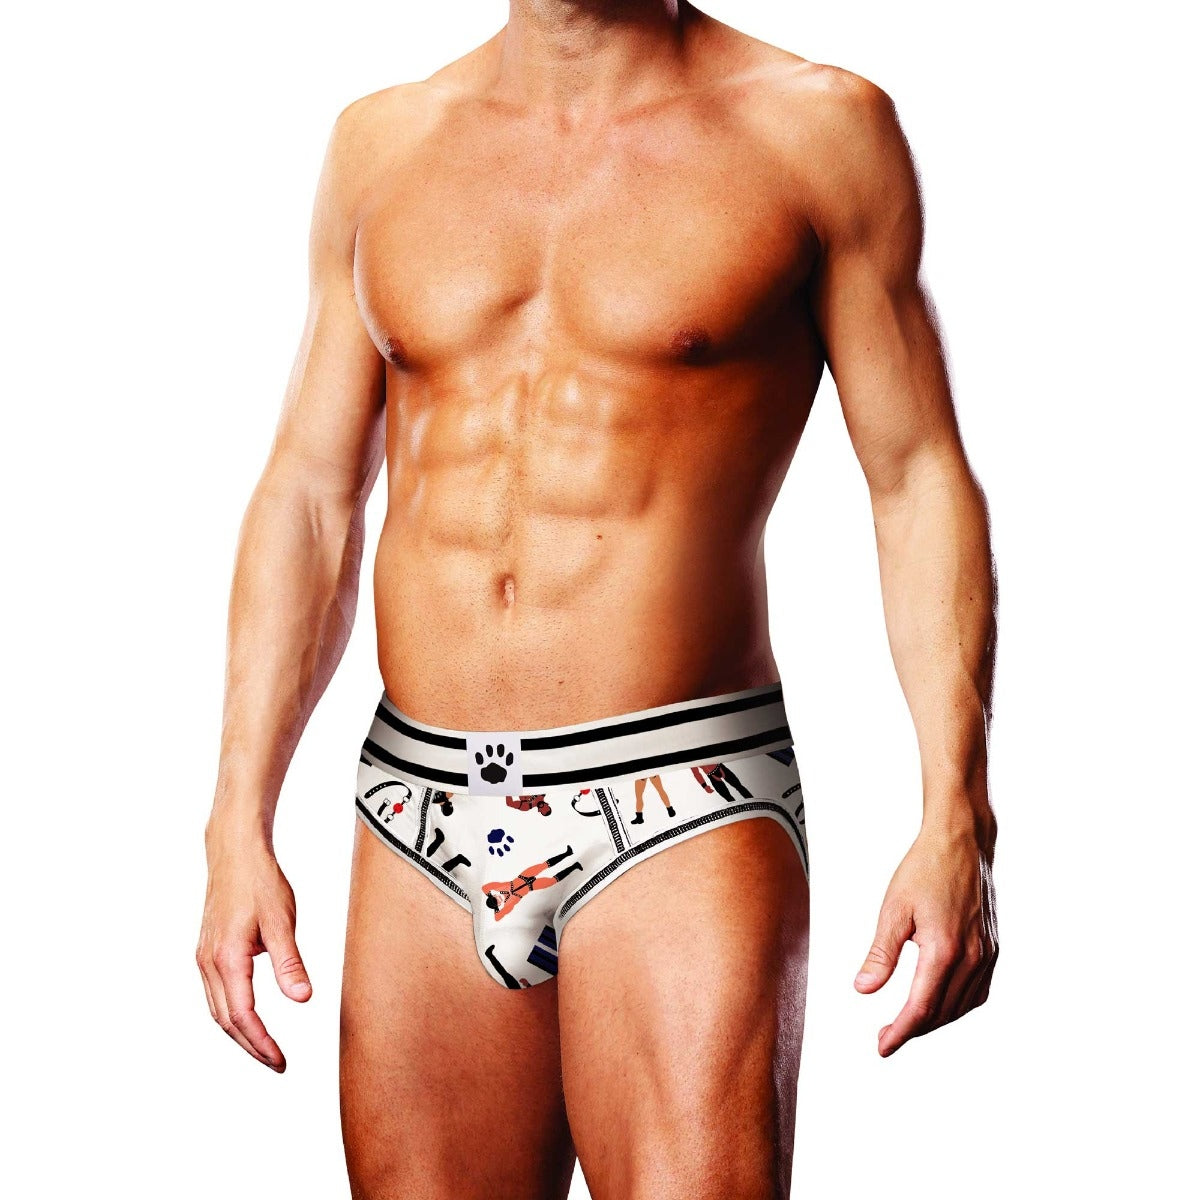 Prowler Leather Pride Backless Brief Black White